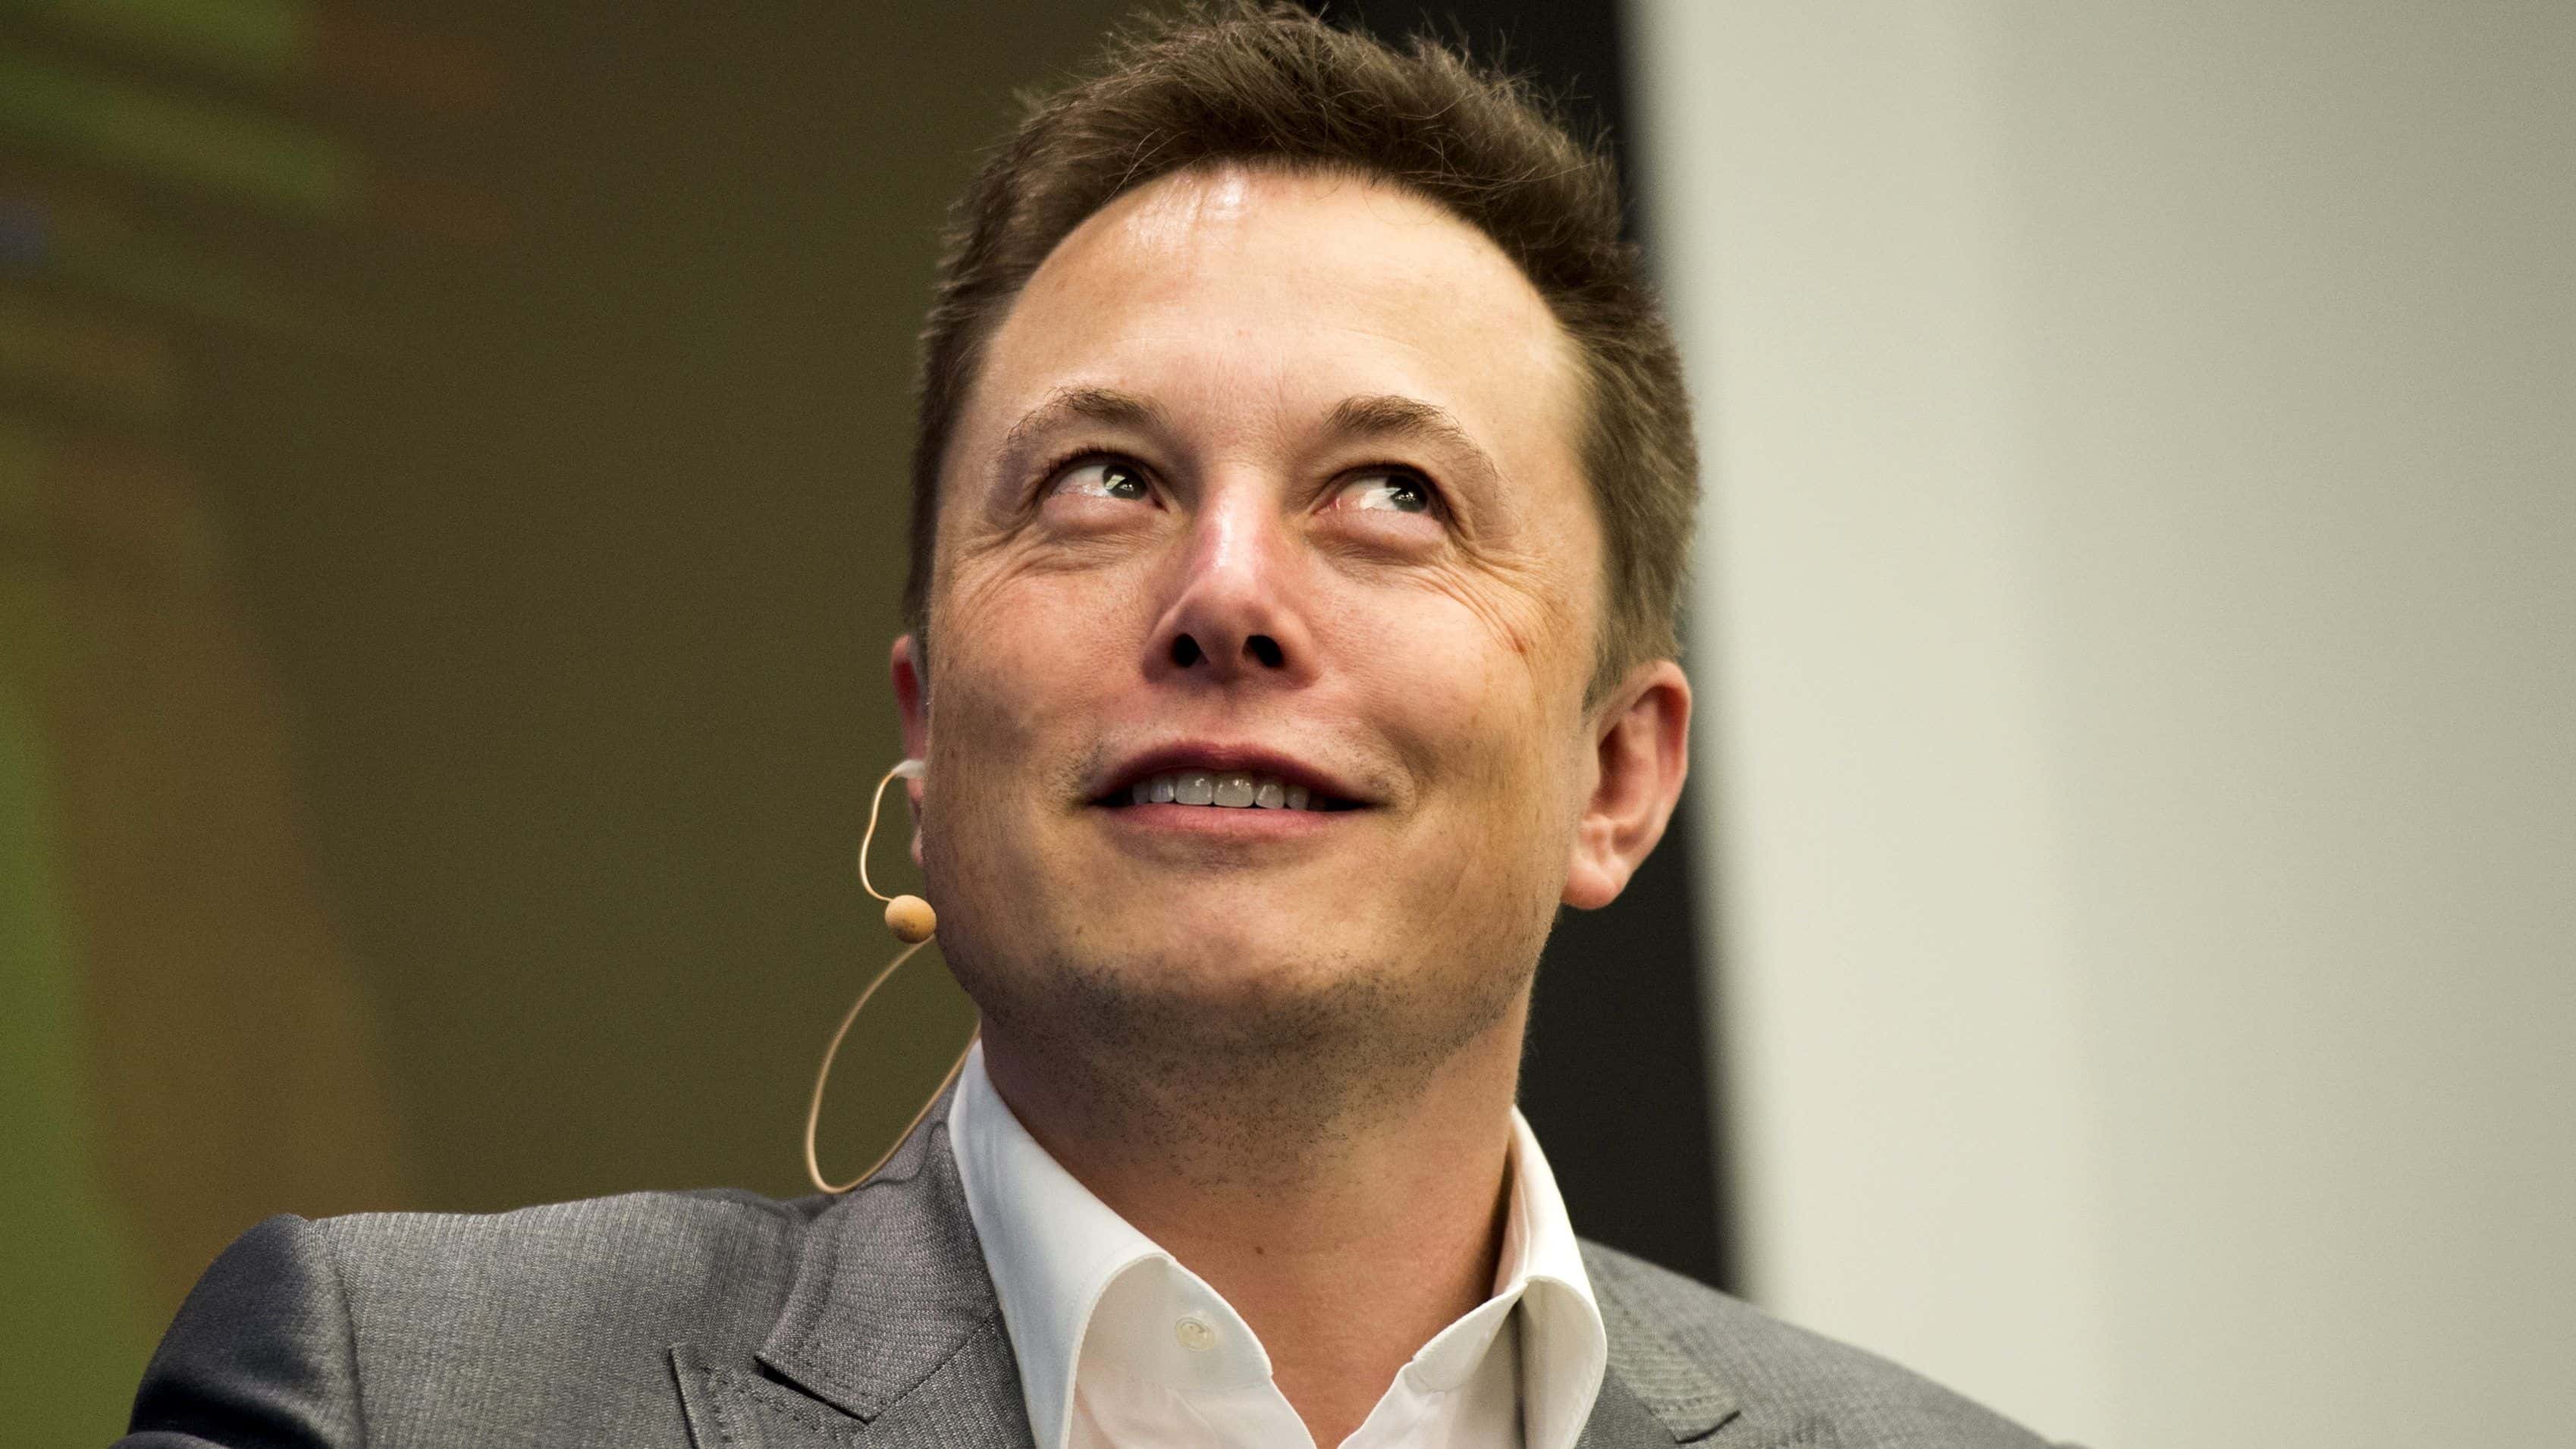 <p>Elon Musk must get endless enjoyment out of creating new technologies, just for the opportunity of naming them alone. His Falcon rockets are named after Han Solo’s spaceship in <em>Star Wars</em>, the “Millennium Falcon". Further, his Dragon rocket is named after “Puff the Magic Dragon” because so many critics thought what he was doing was so unbelievably impossible—kind of like a mythical creature.</p>